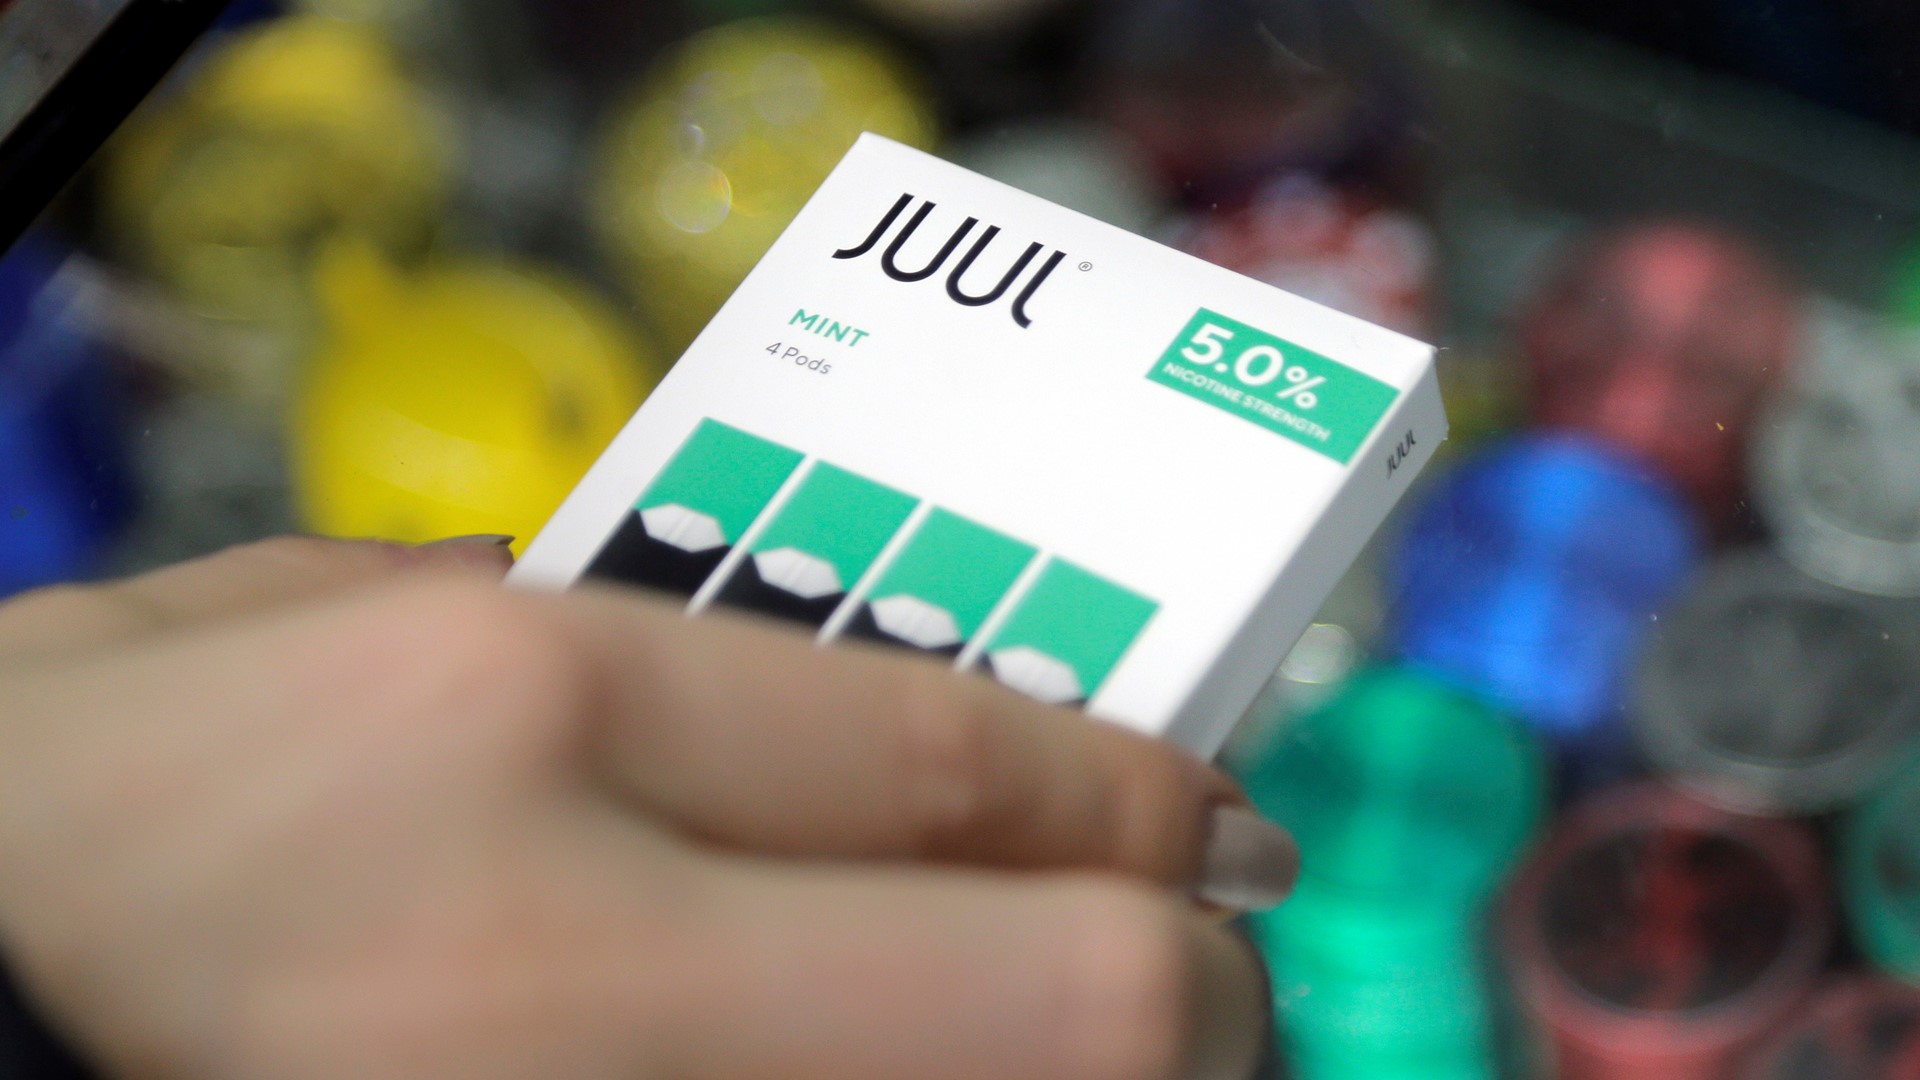 Northern California school districts will seek compensation from Juul for students who are absent from classes and education programs about vaping.